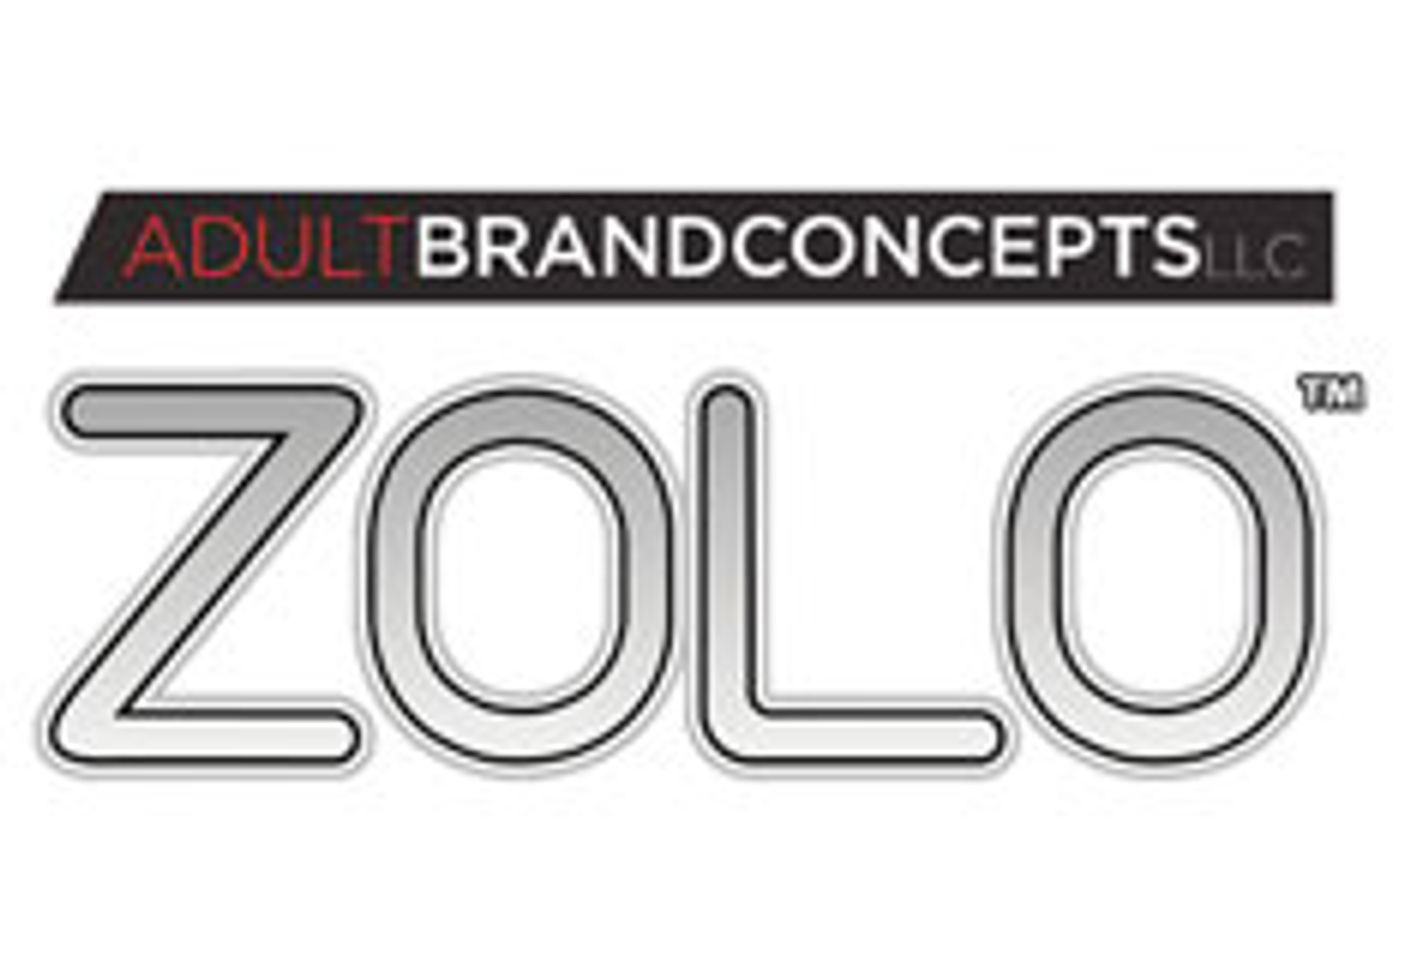 Zolo Pleasure Cup Takes ‘O’ Award for Outstanding Non-Powered Product